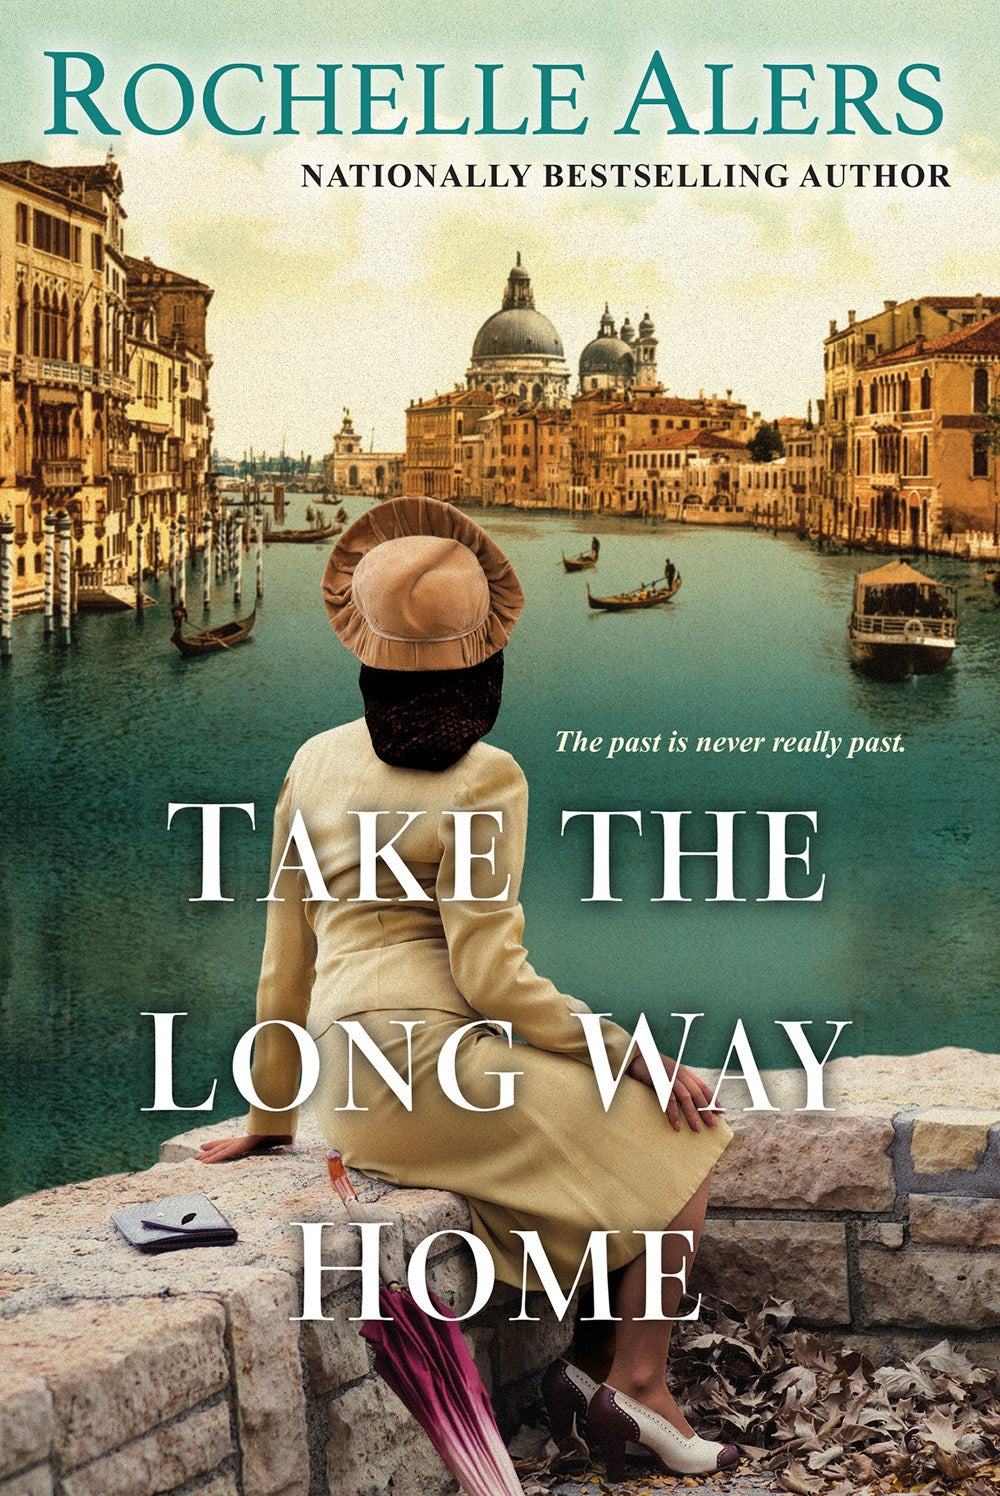 PRE-ORDER: Take the Long Way Home